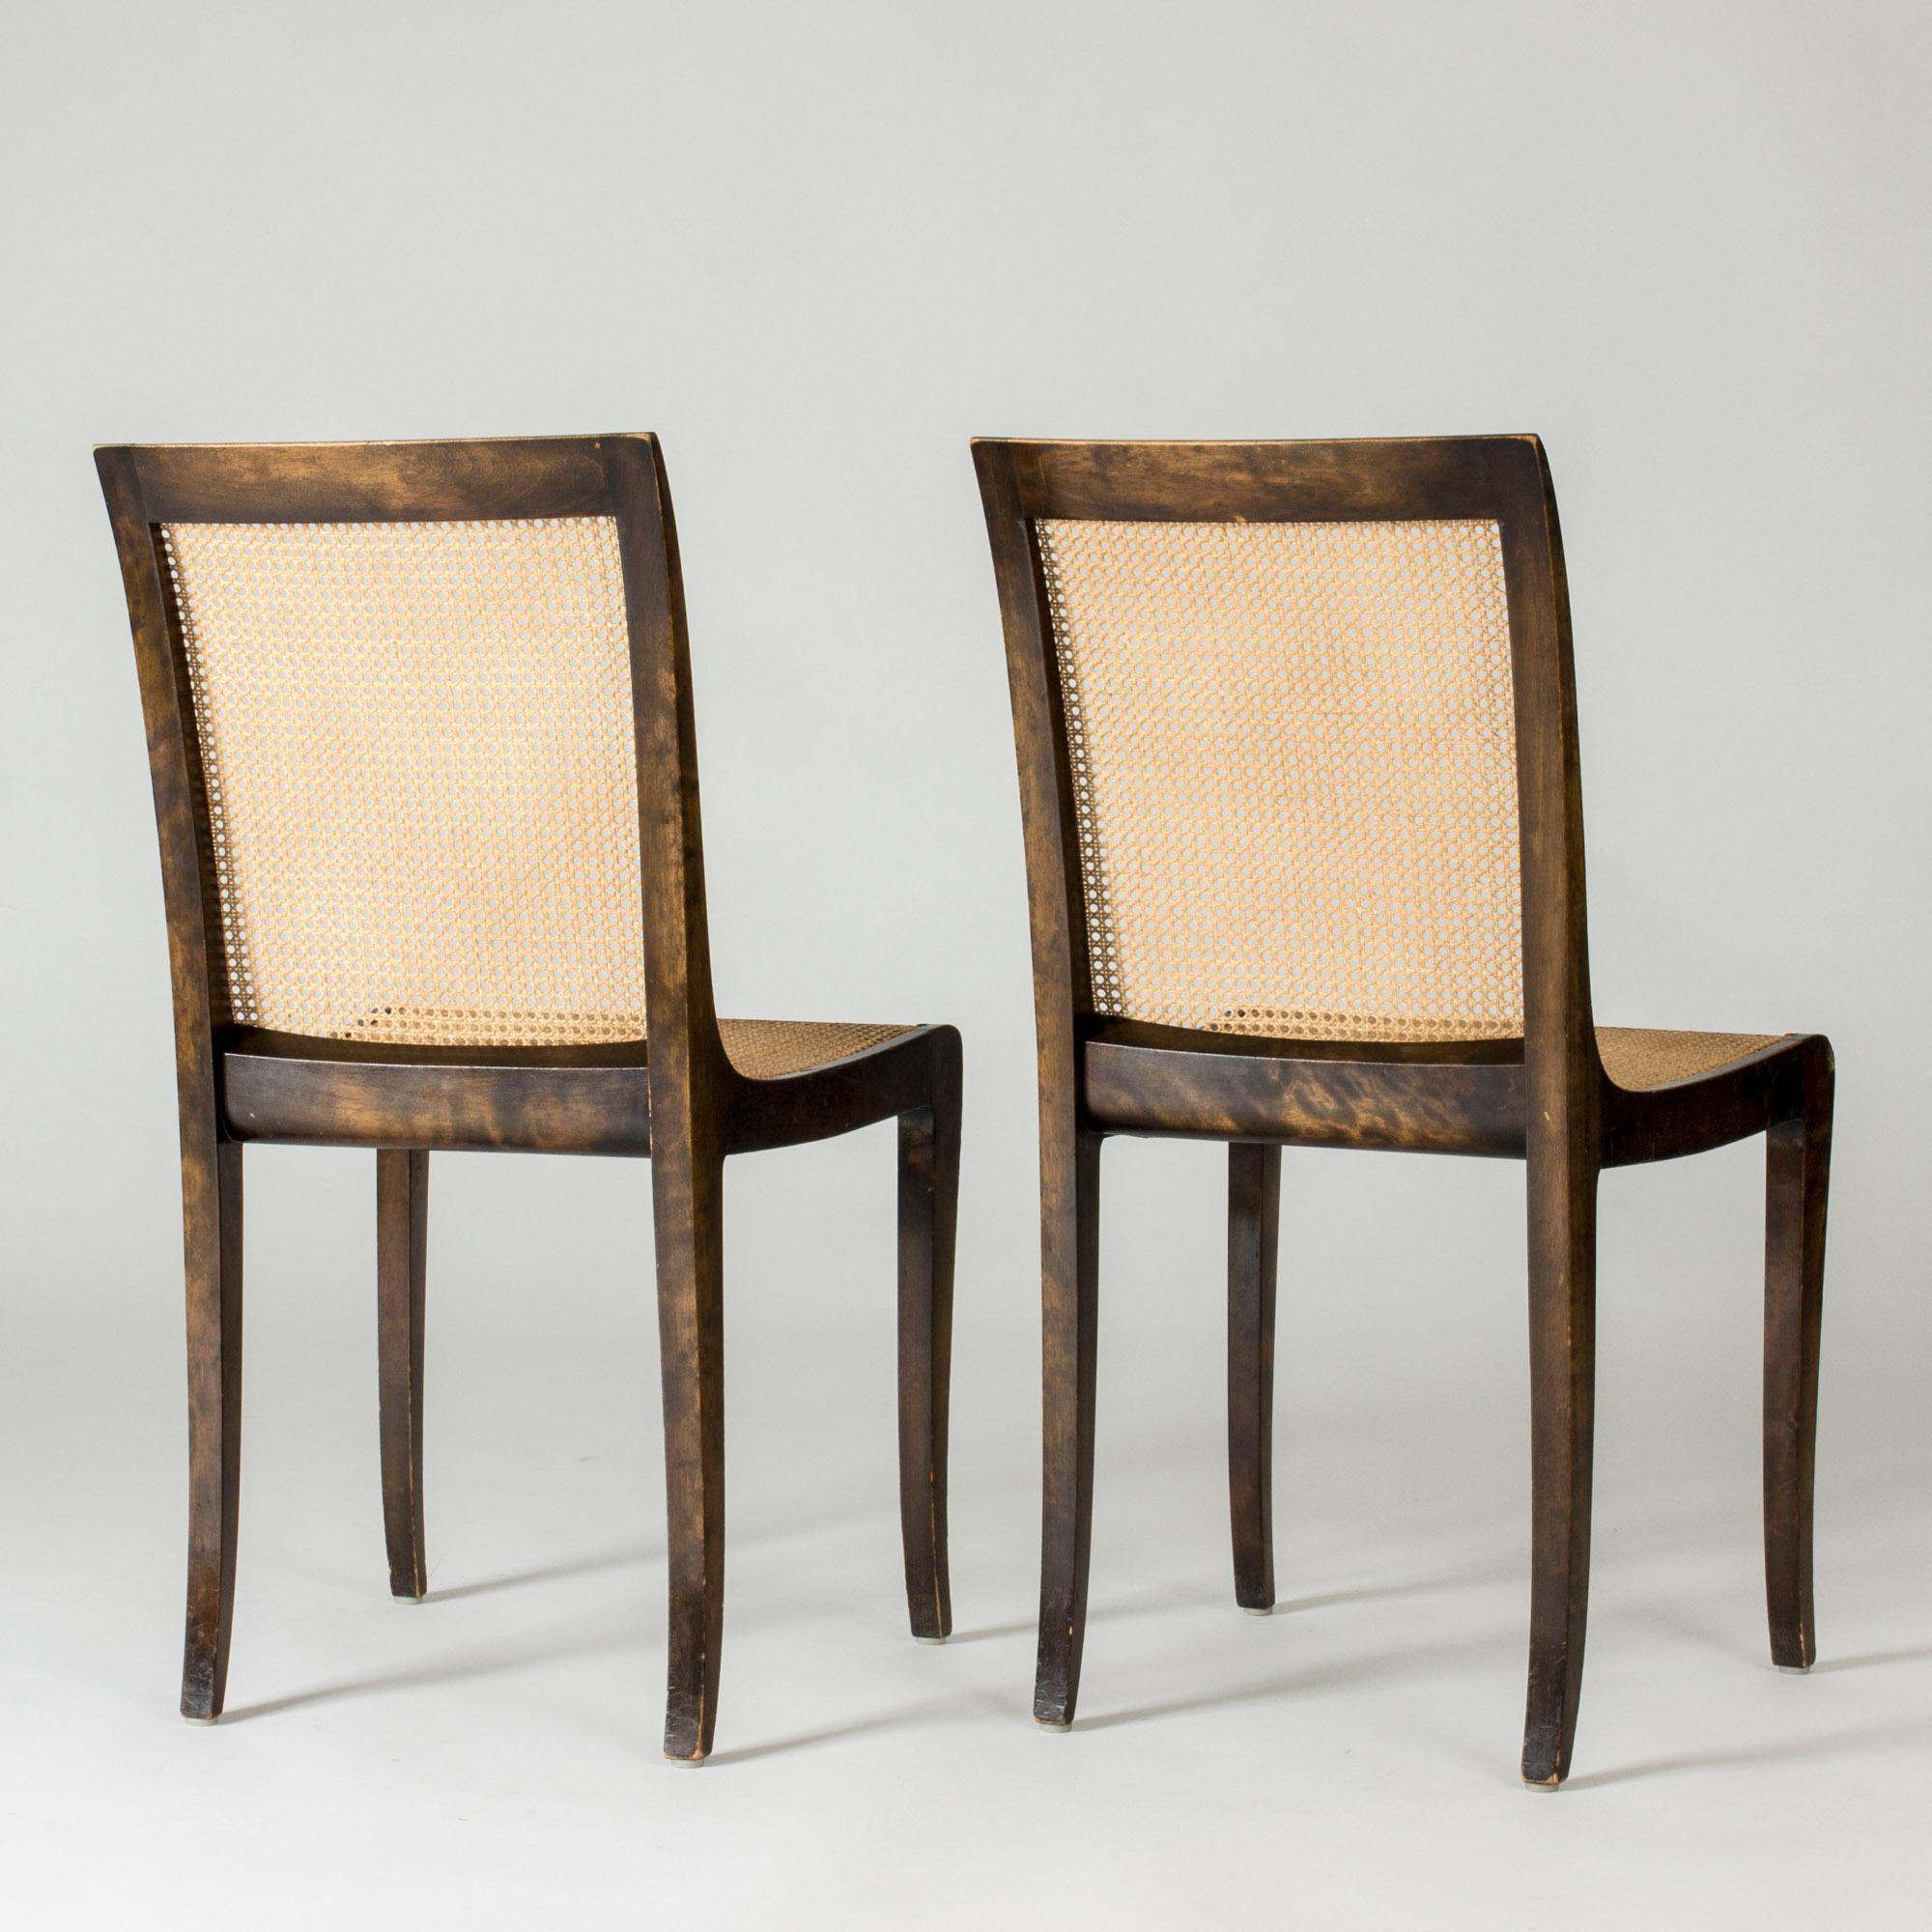 Scandinavian Modern Pair of Side Chairs by Carl Malmsten, Sweden, 1930s For Sale